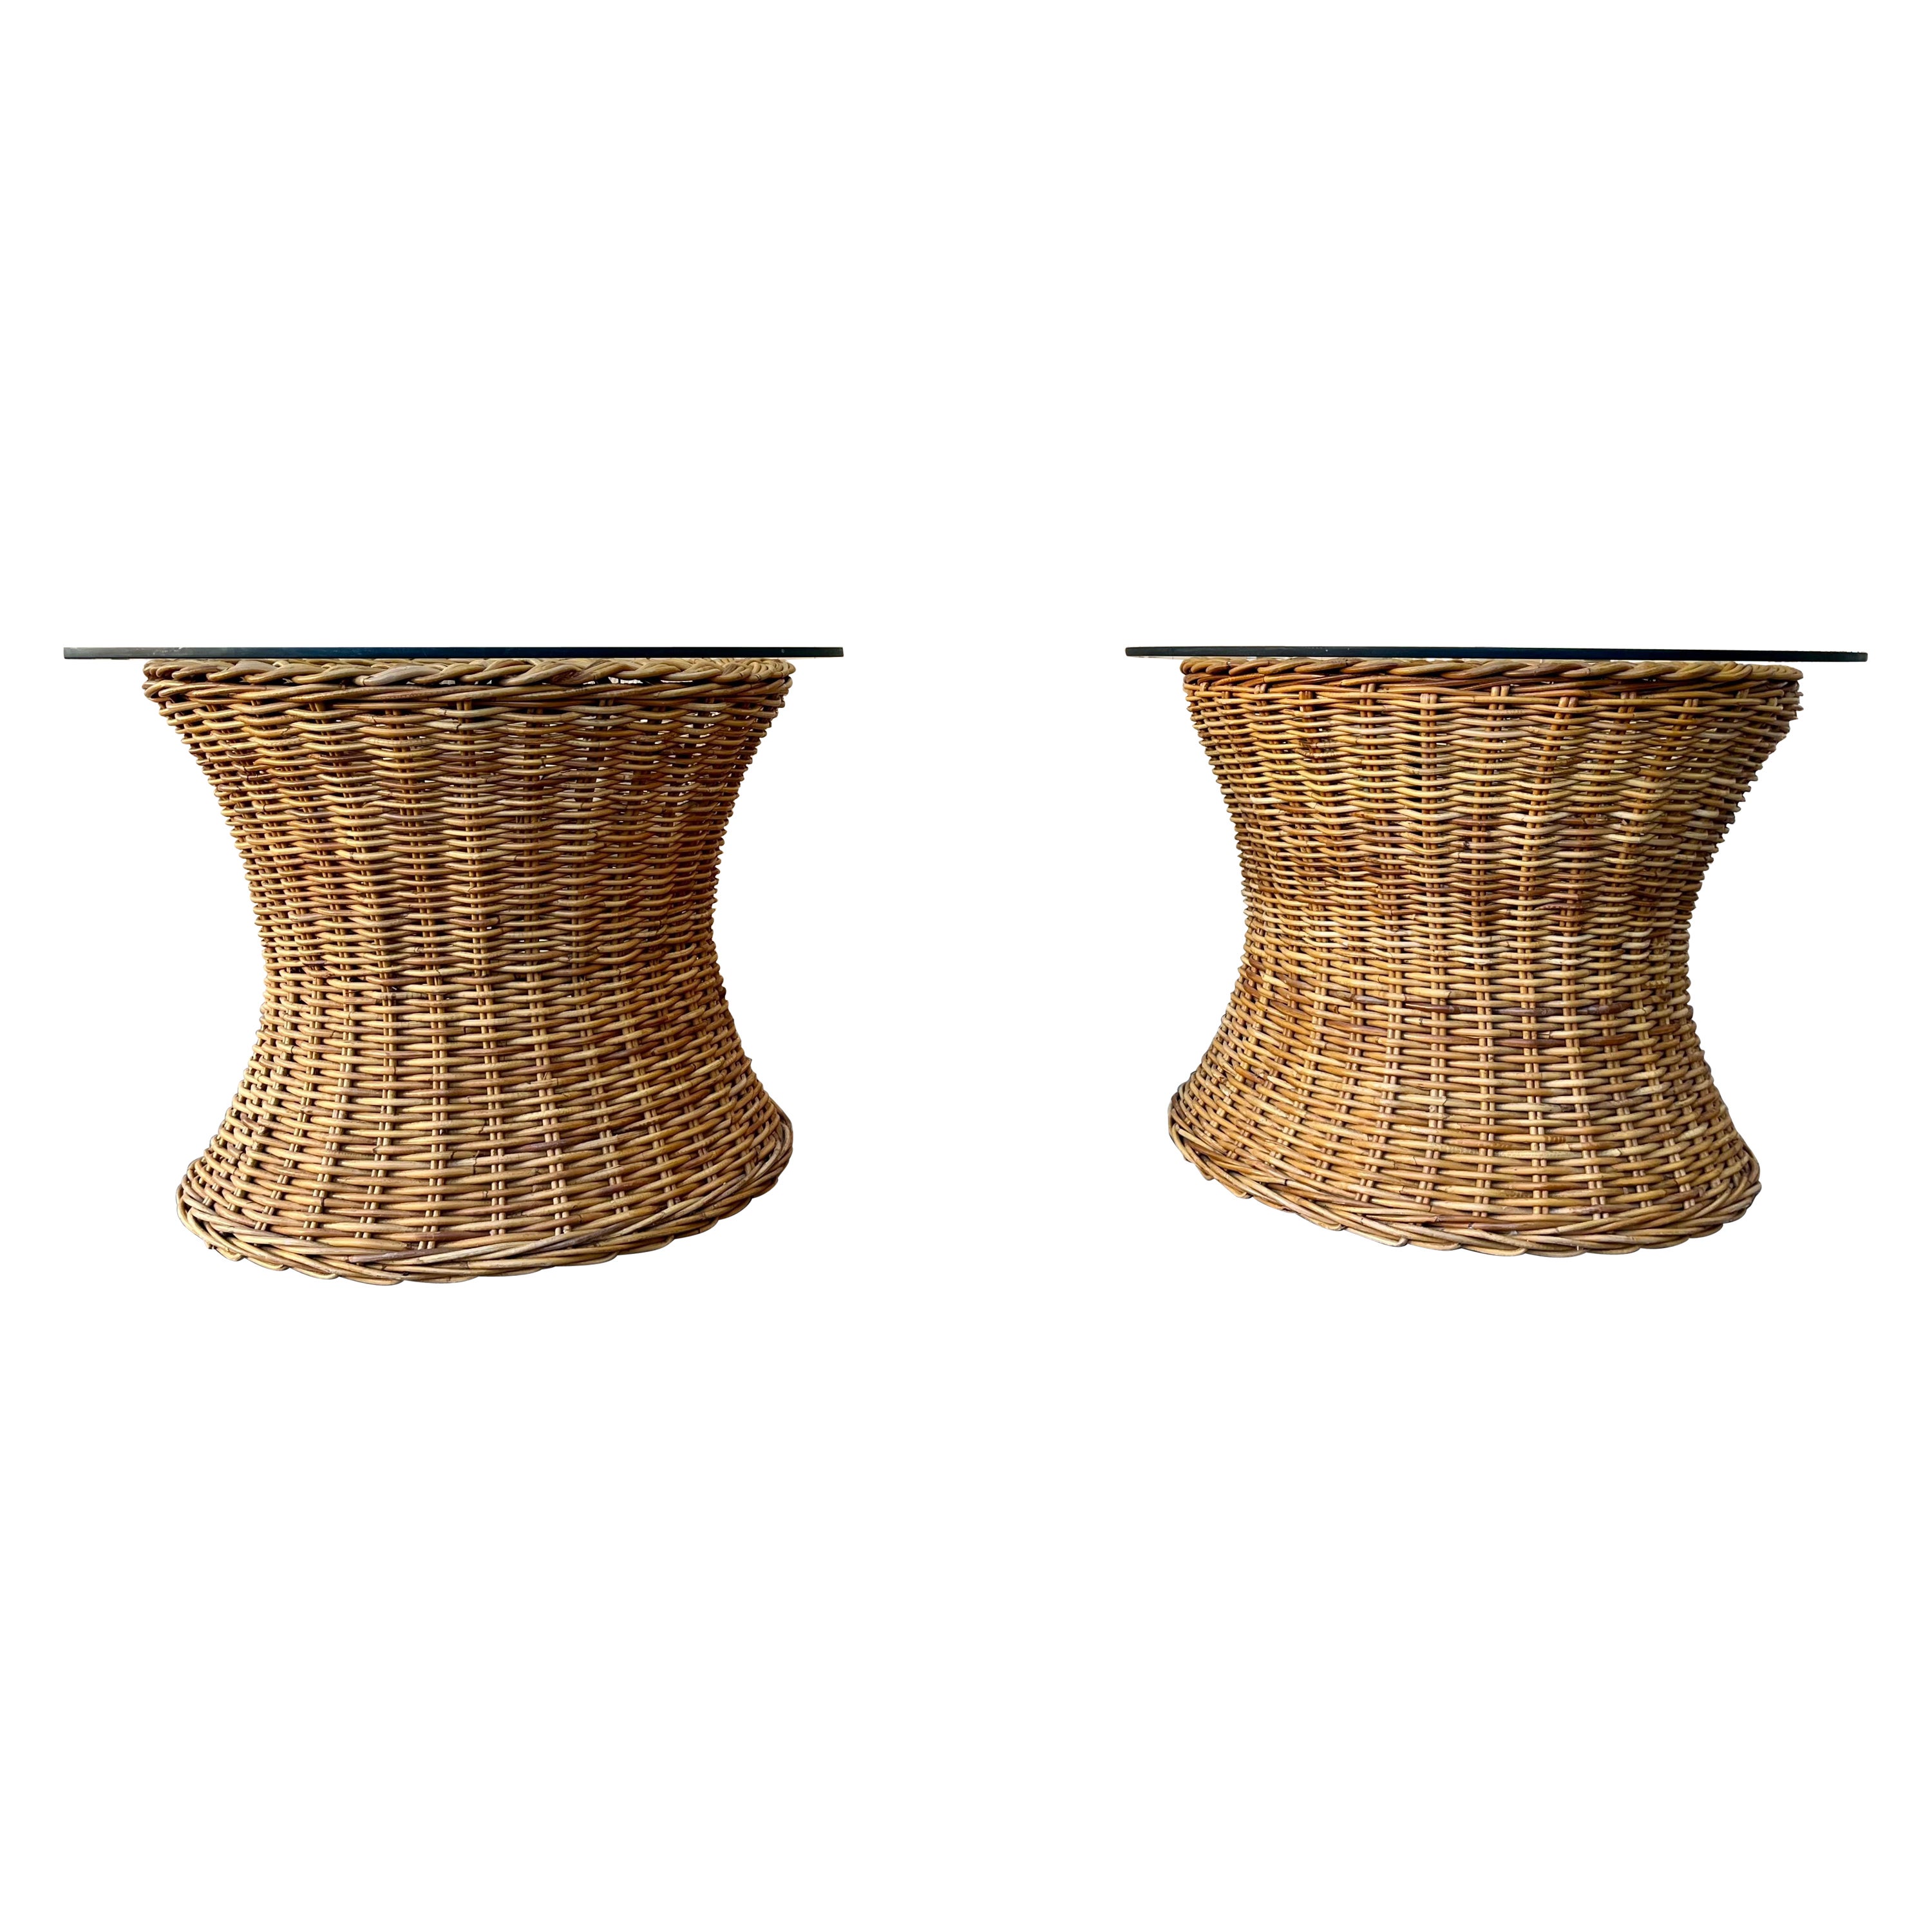 Pair of Natural Wicker/Rattan Coastal Style Round Side Tables. Circa 1970s